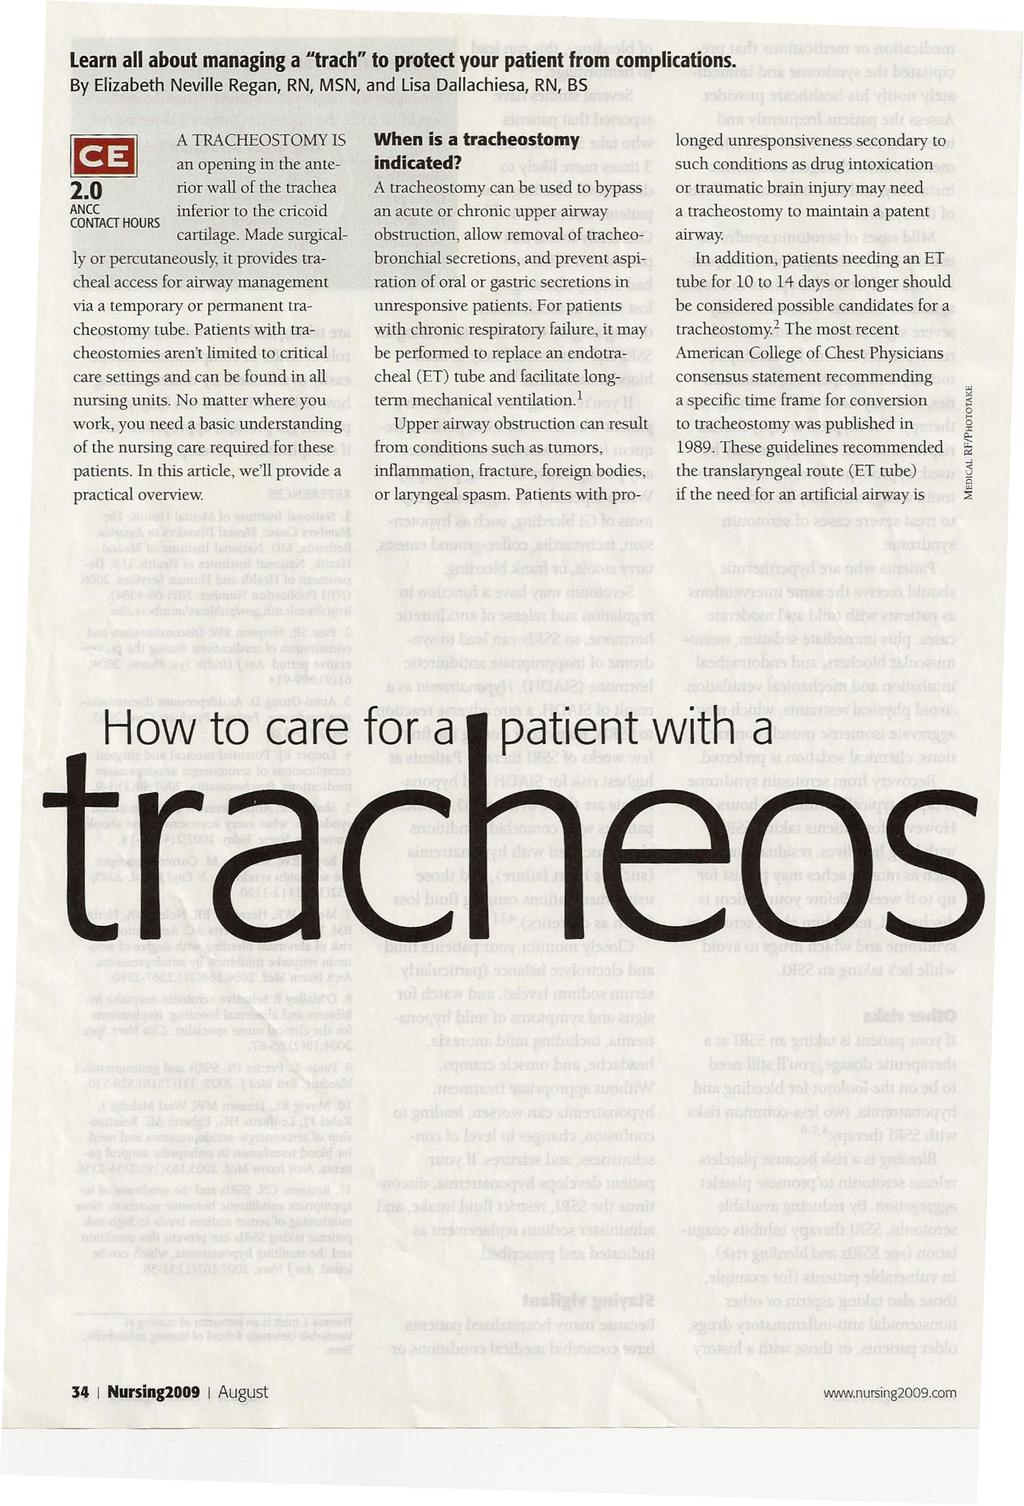 Learn all about managing a "trach" to protect your patient from complications. By Elizabeth Neville Regan, RN, MSN, and Lisa Dallachiesa, RN, BS m 2.0 ANCC CONTAG HOURS cartilage.